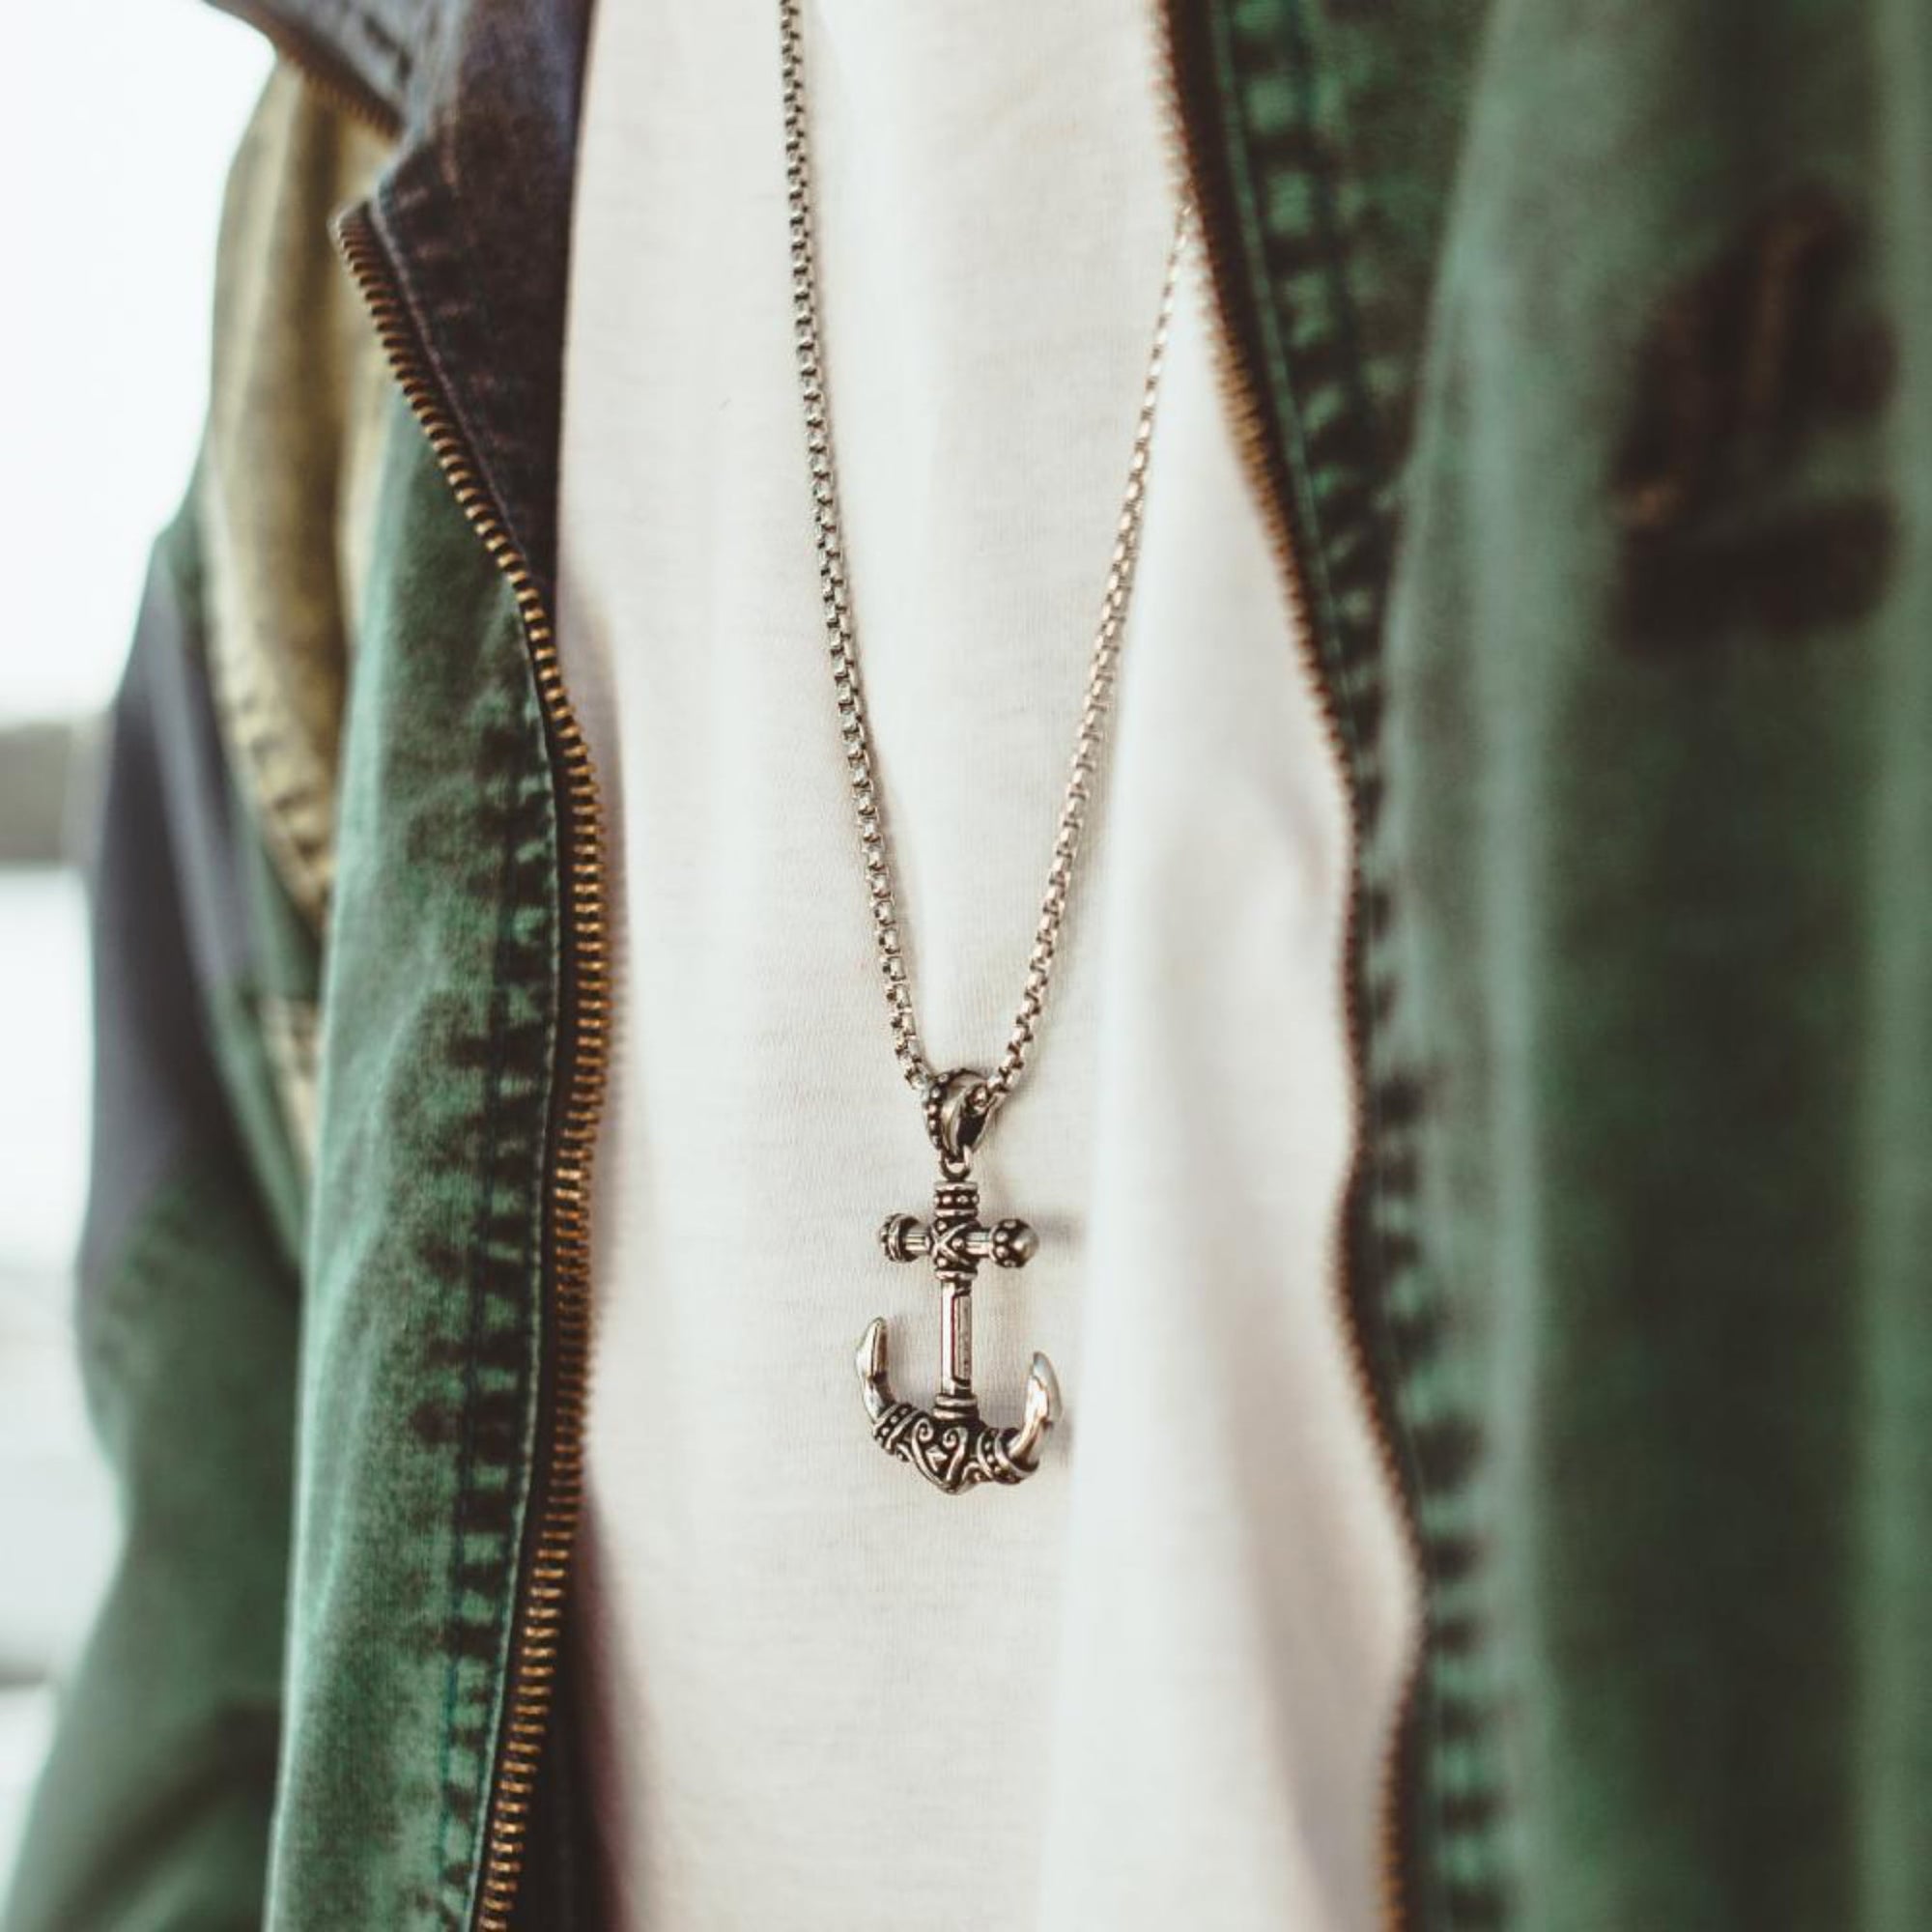 Mens' Steel Rebel Anchor Pendant with Chain at Arman's Jewellers Kitchener